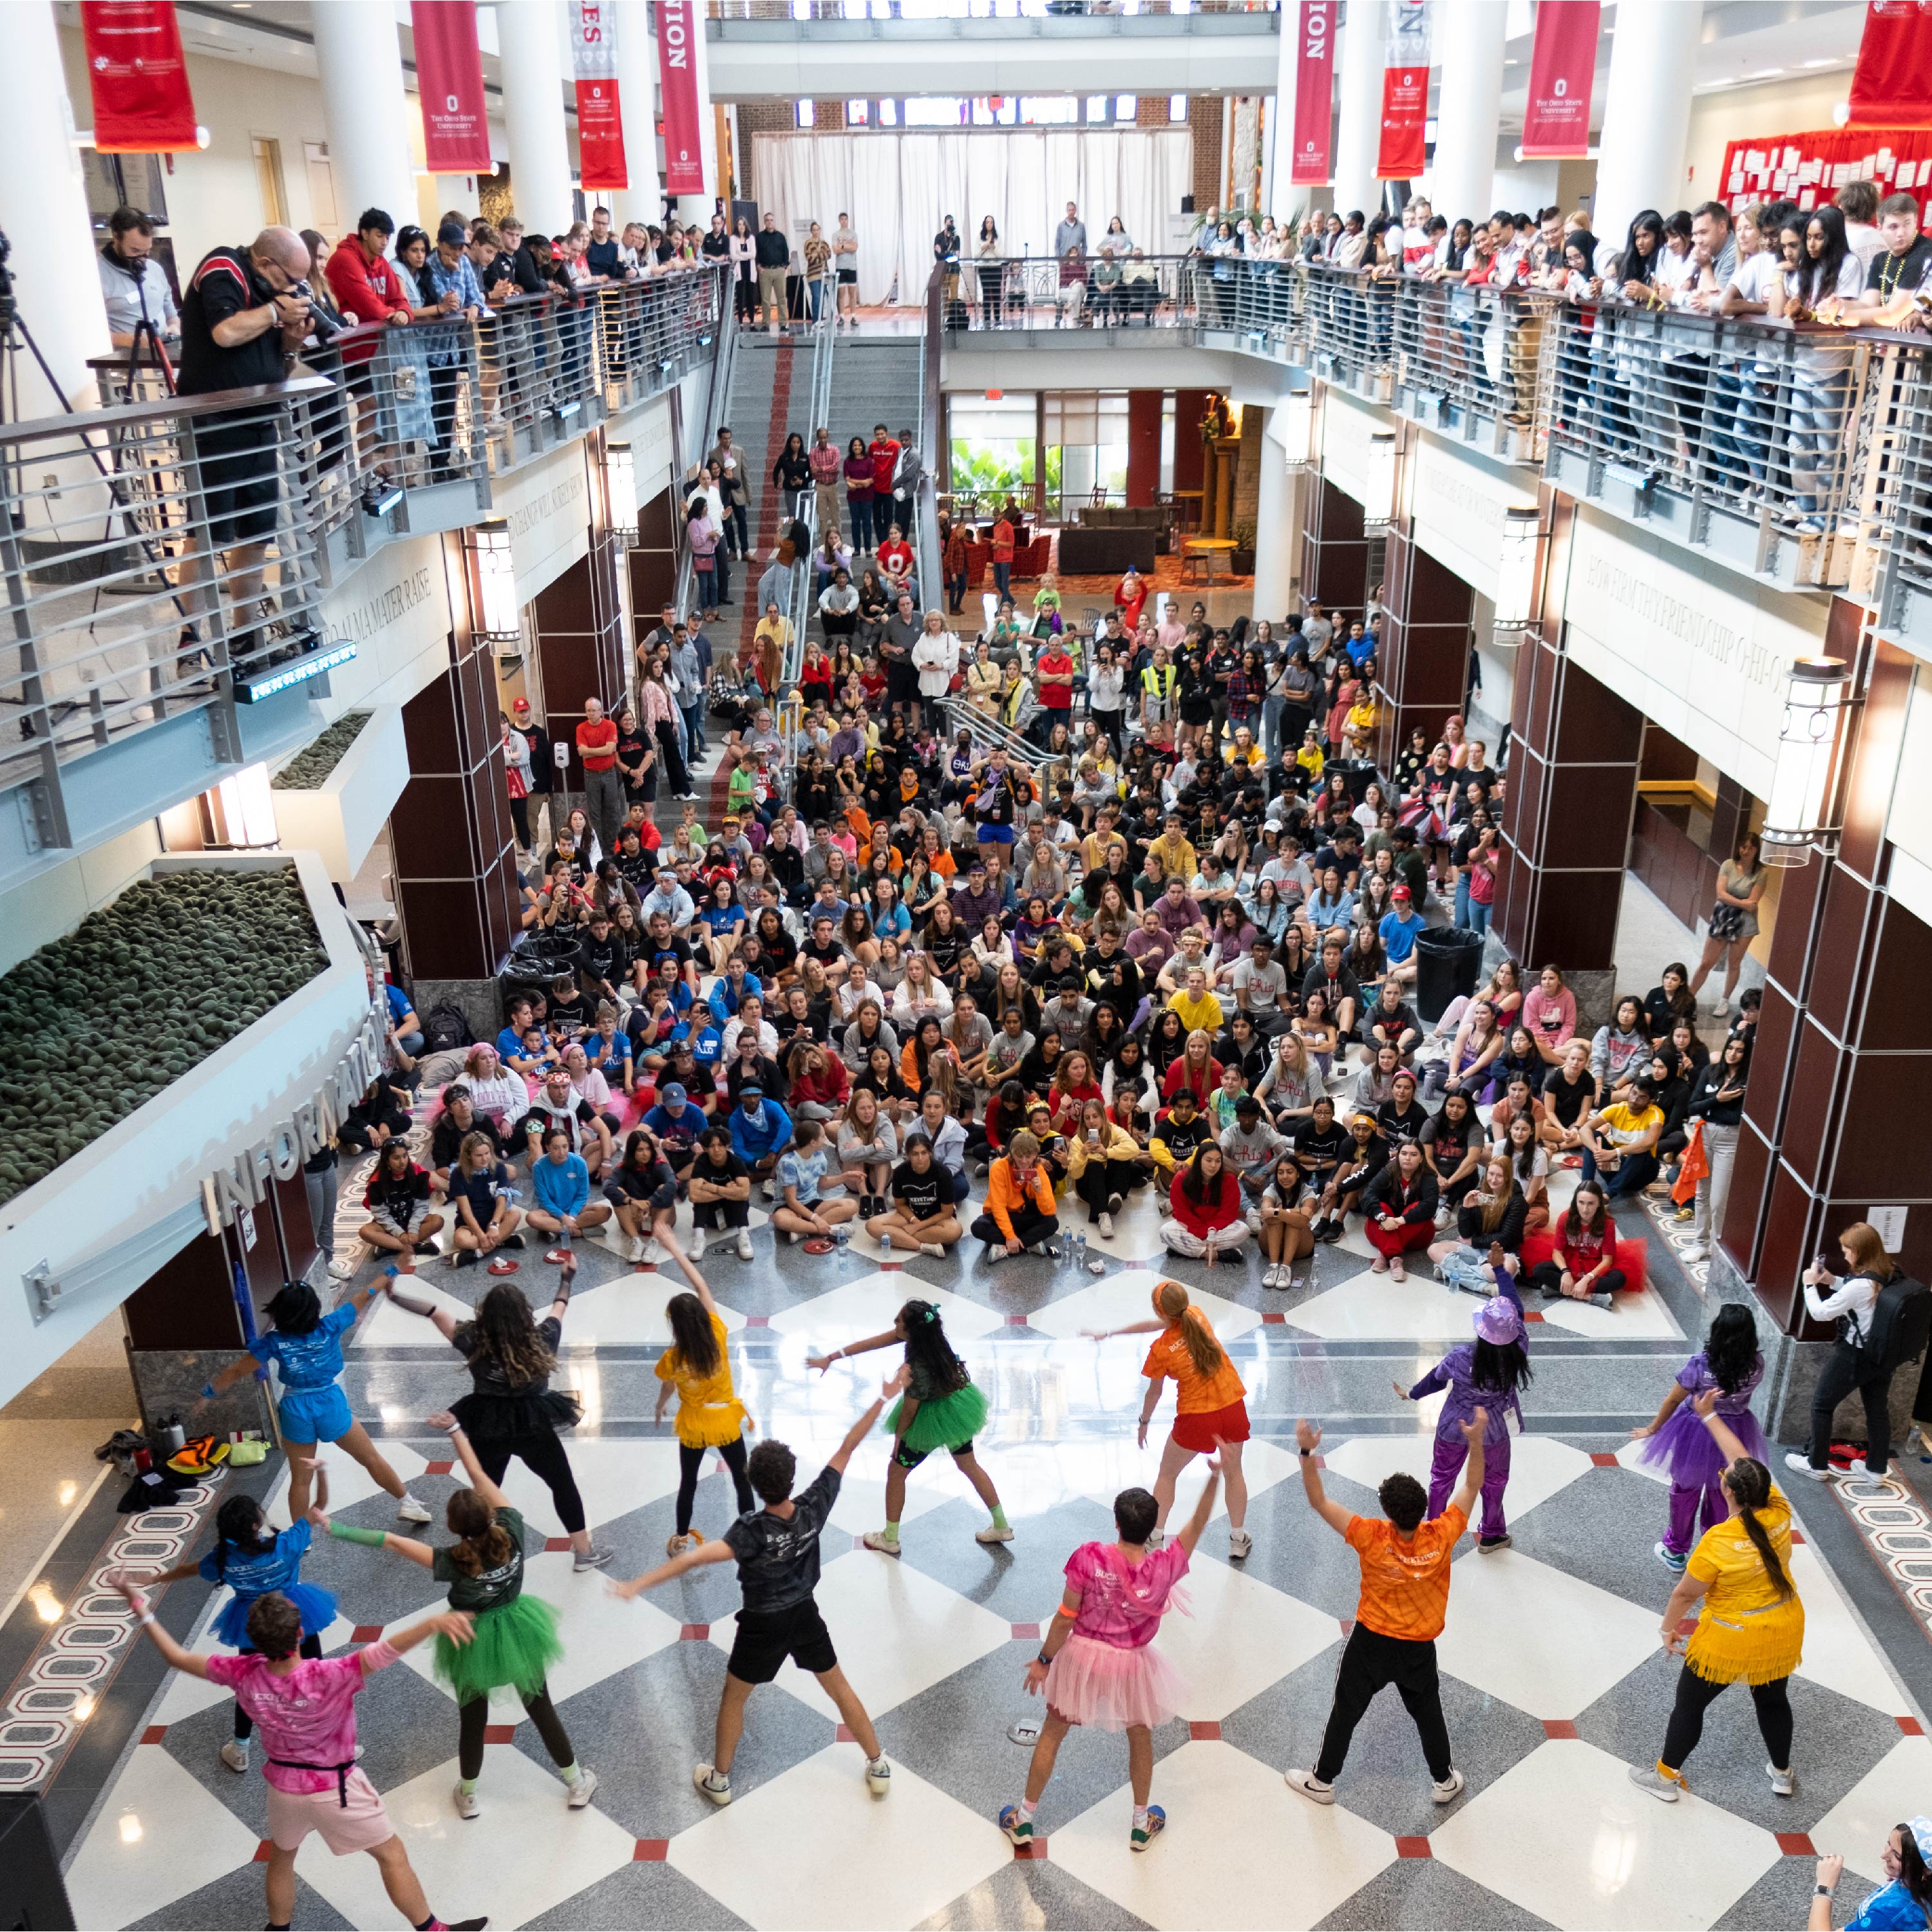 An overheard view of students performing in front of a large audience in the atrium of the Ohio Union on Ohio State's Columbus campus.